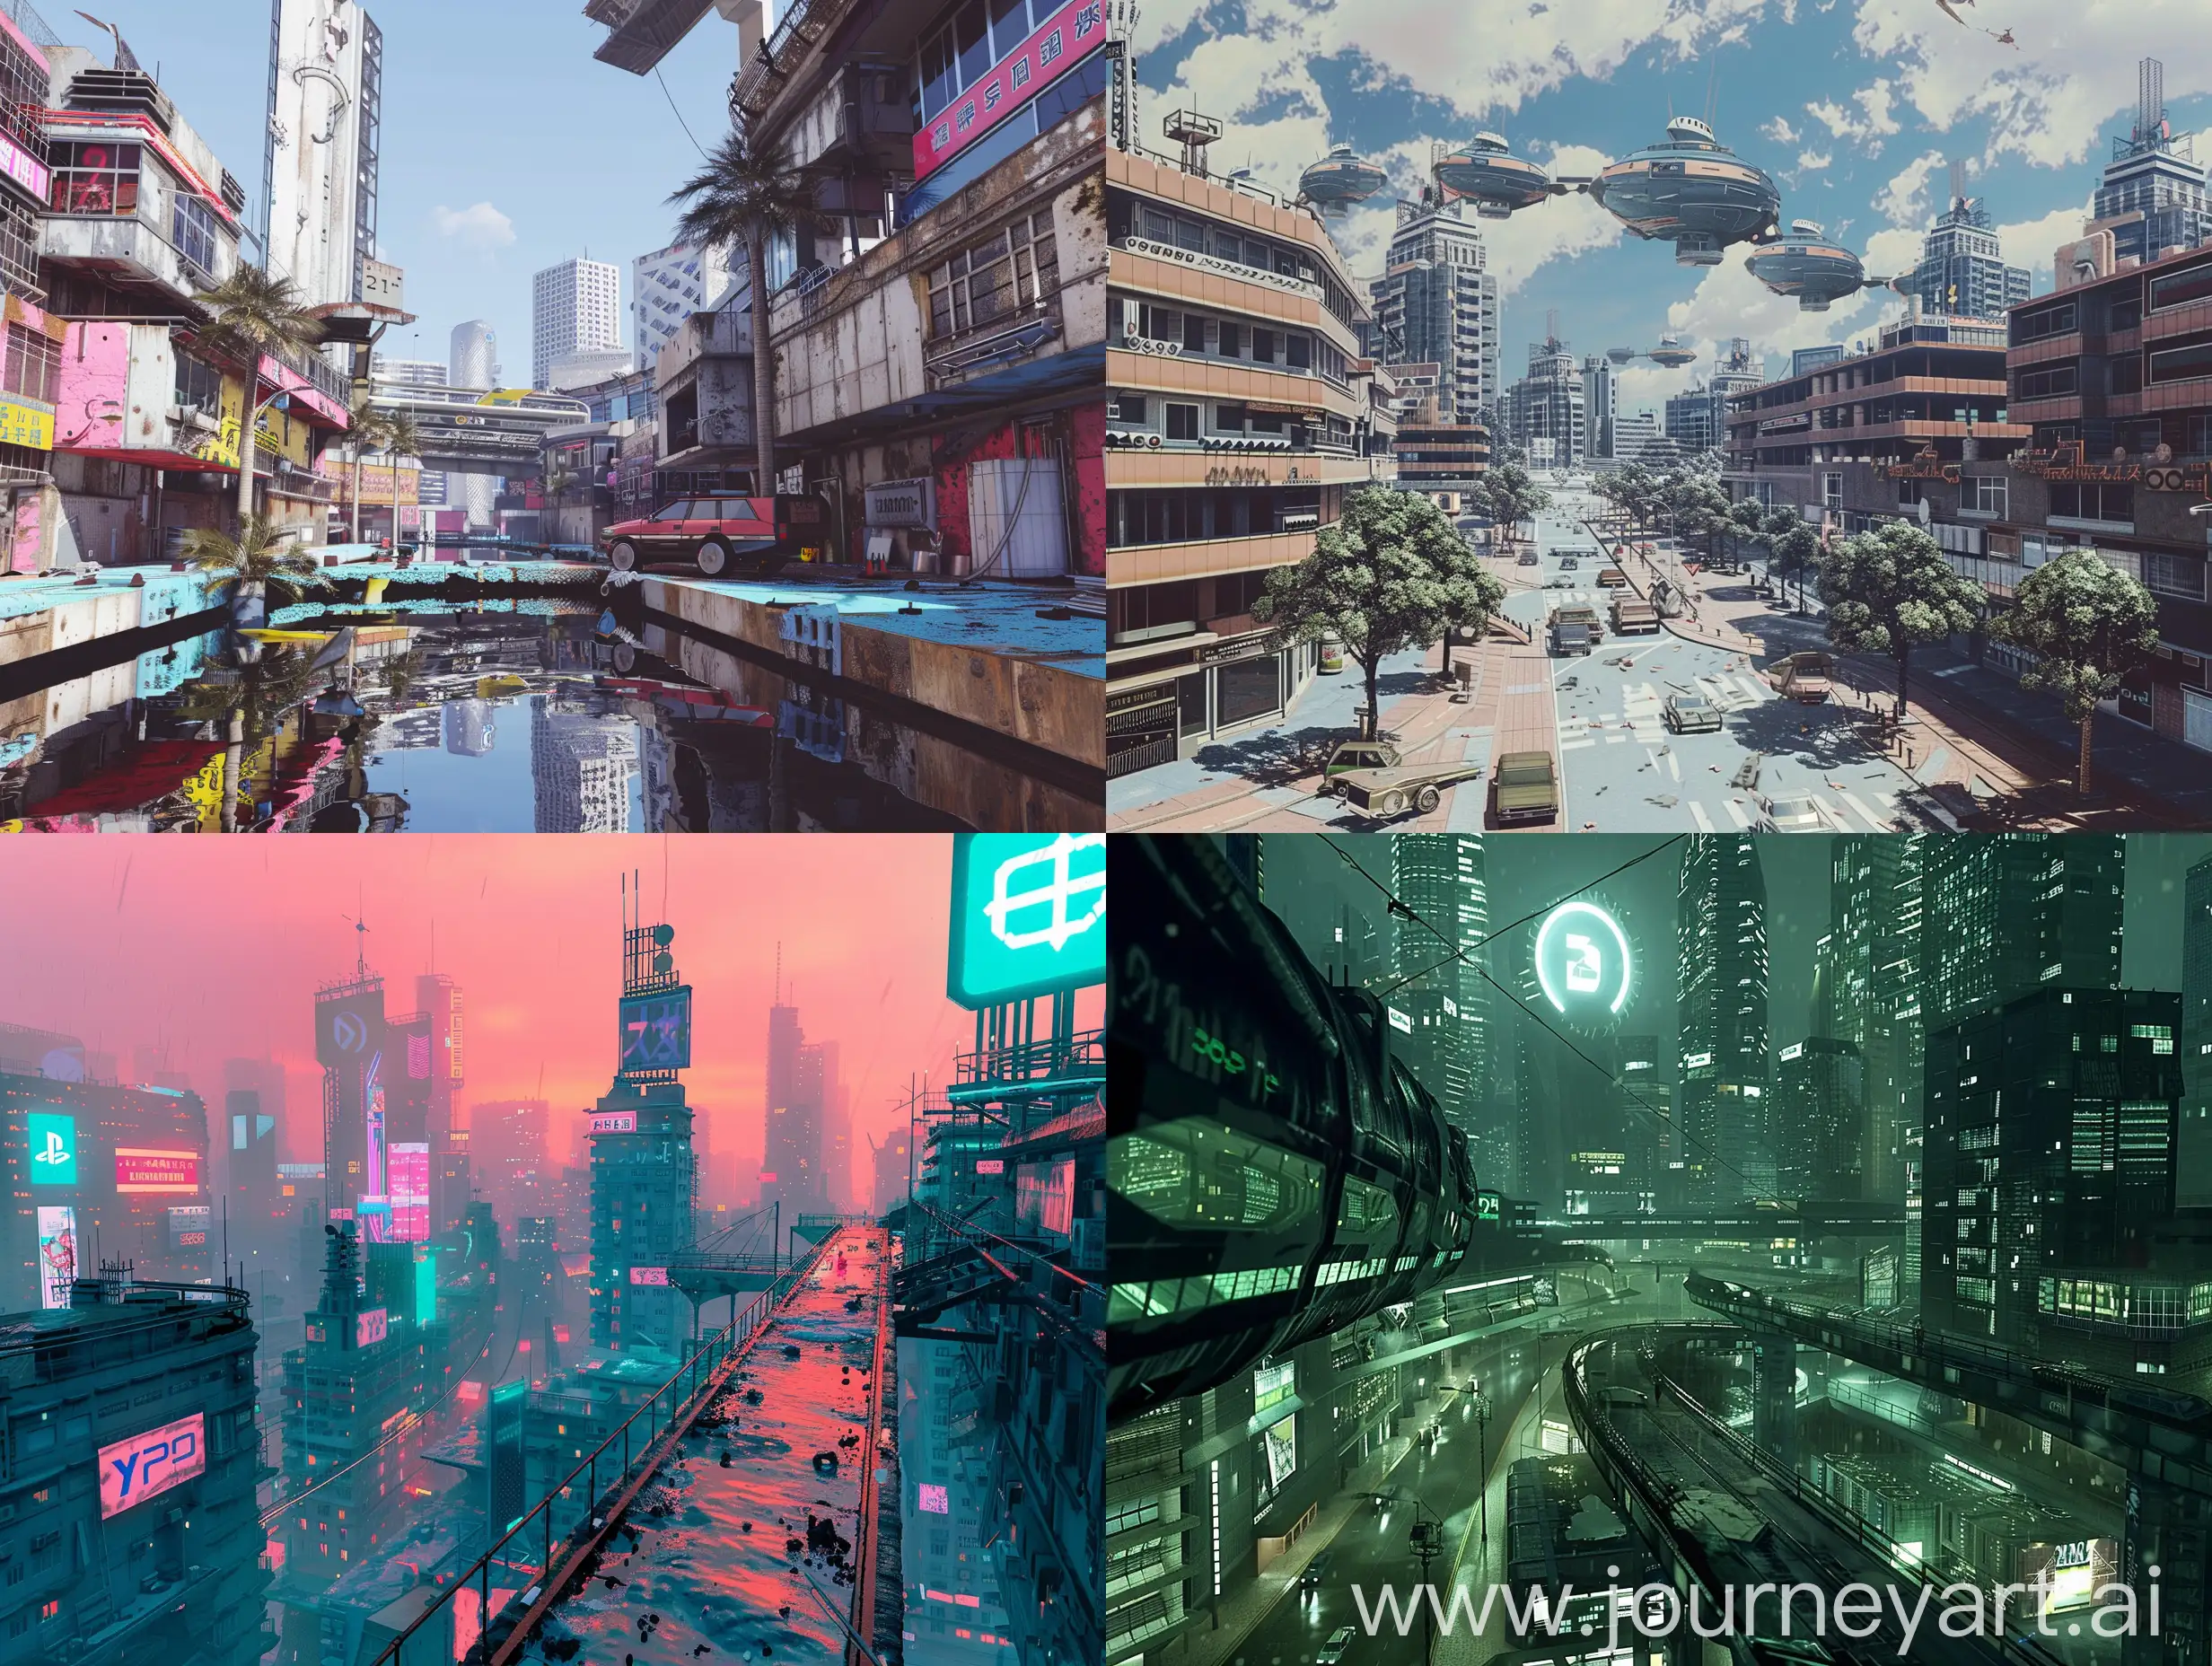 a city, genre, retro, modern, futurism, y2k aesthetic, nostalgic trend, environment, old PlayStation 2 2000s graphics, render, video game,90s, old graphics,

